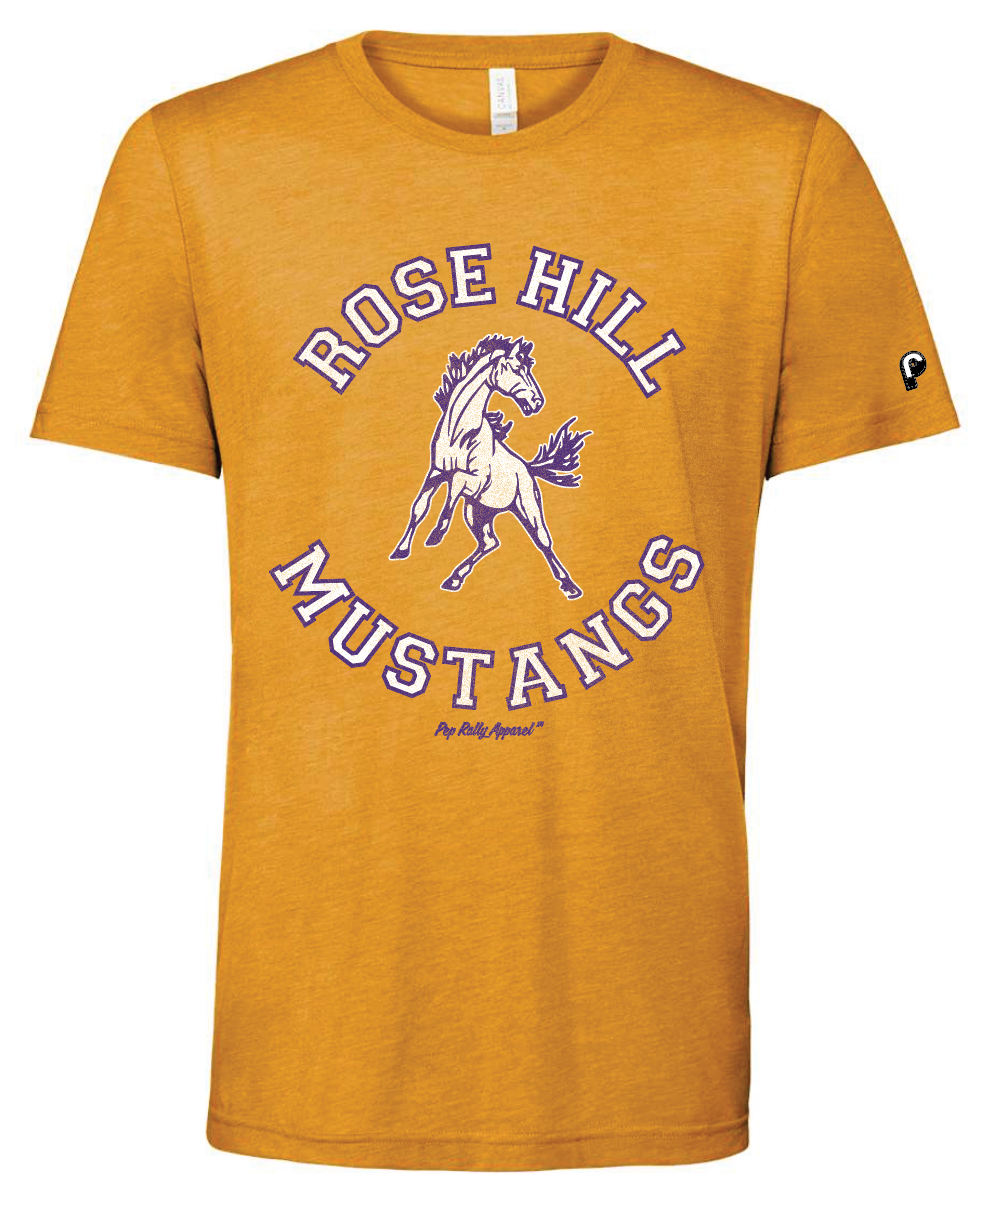 ROSE HILL MUSTANGS CLASSIC TEE